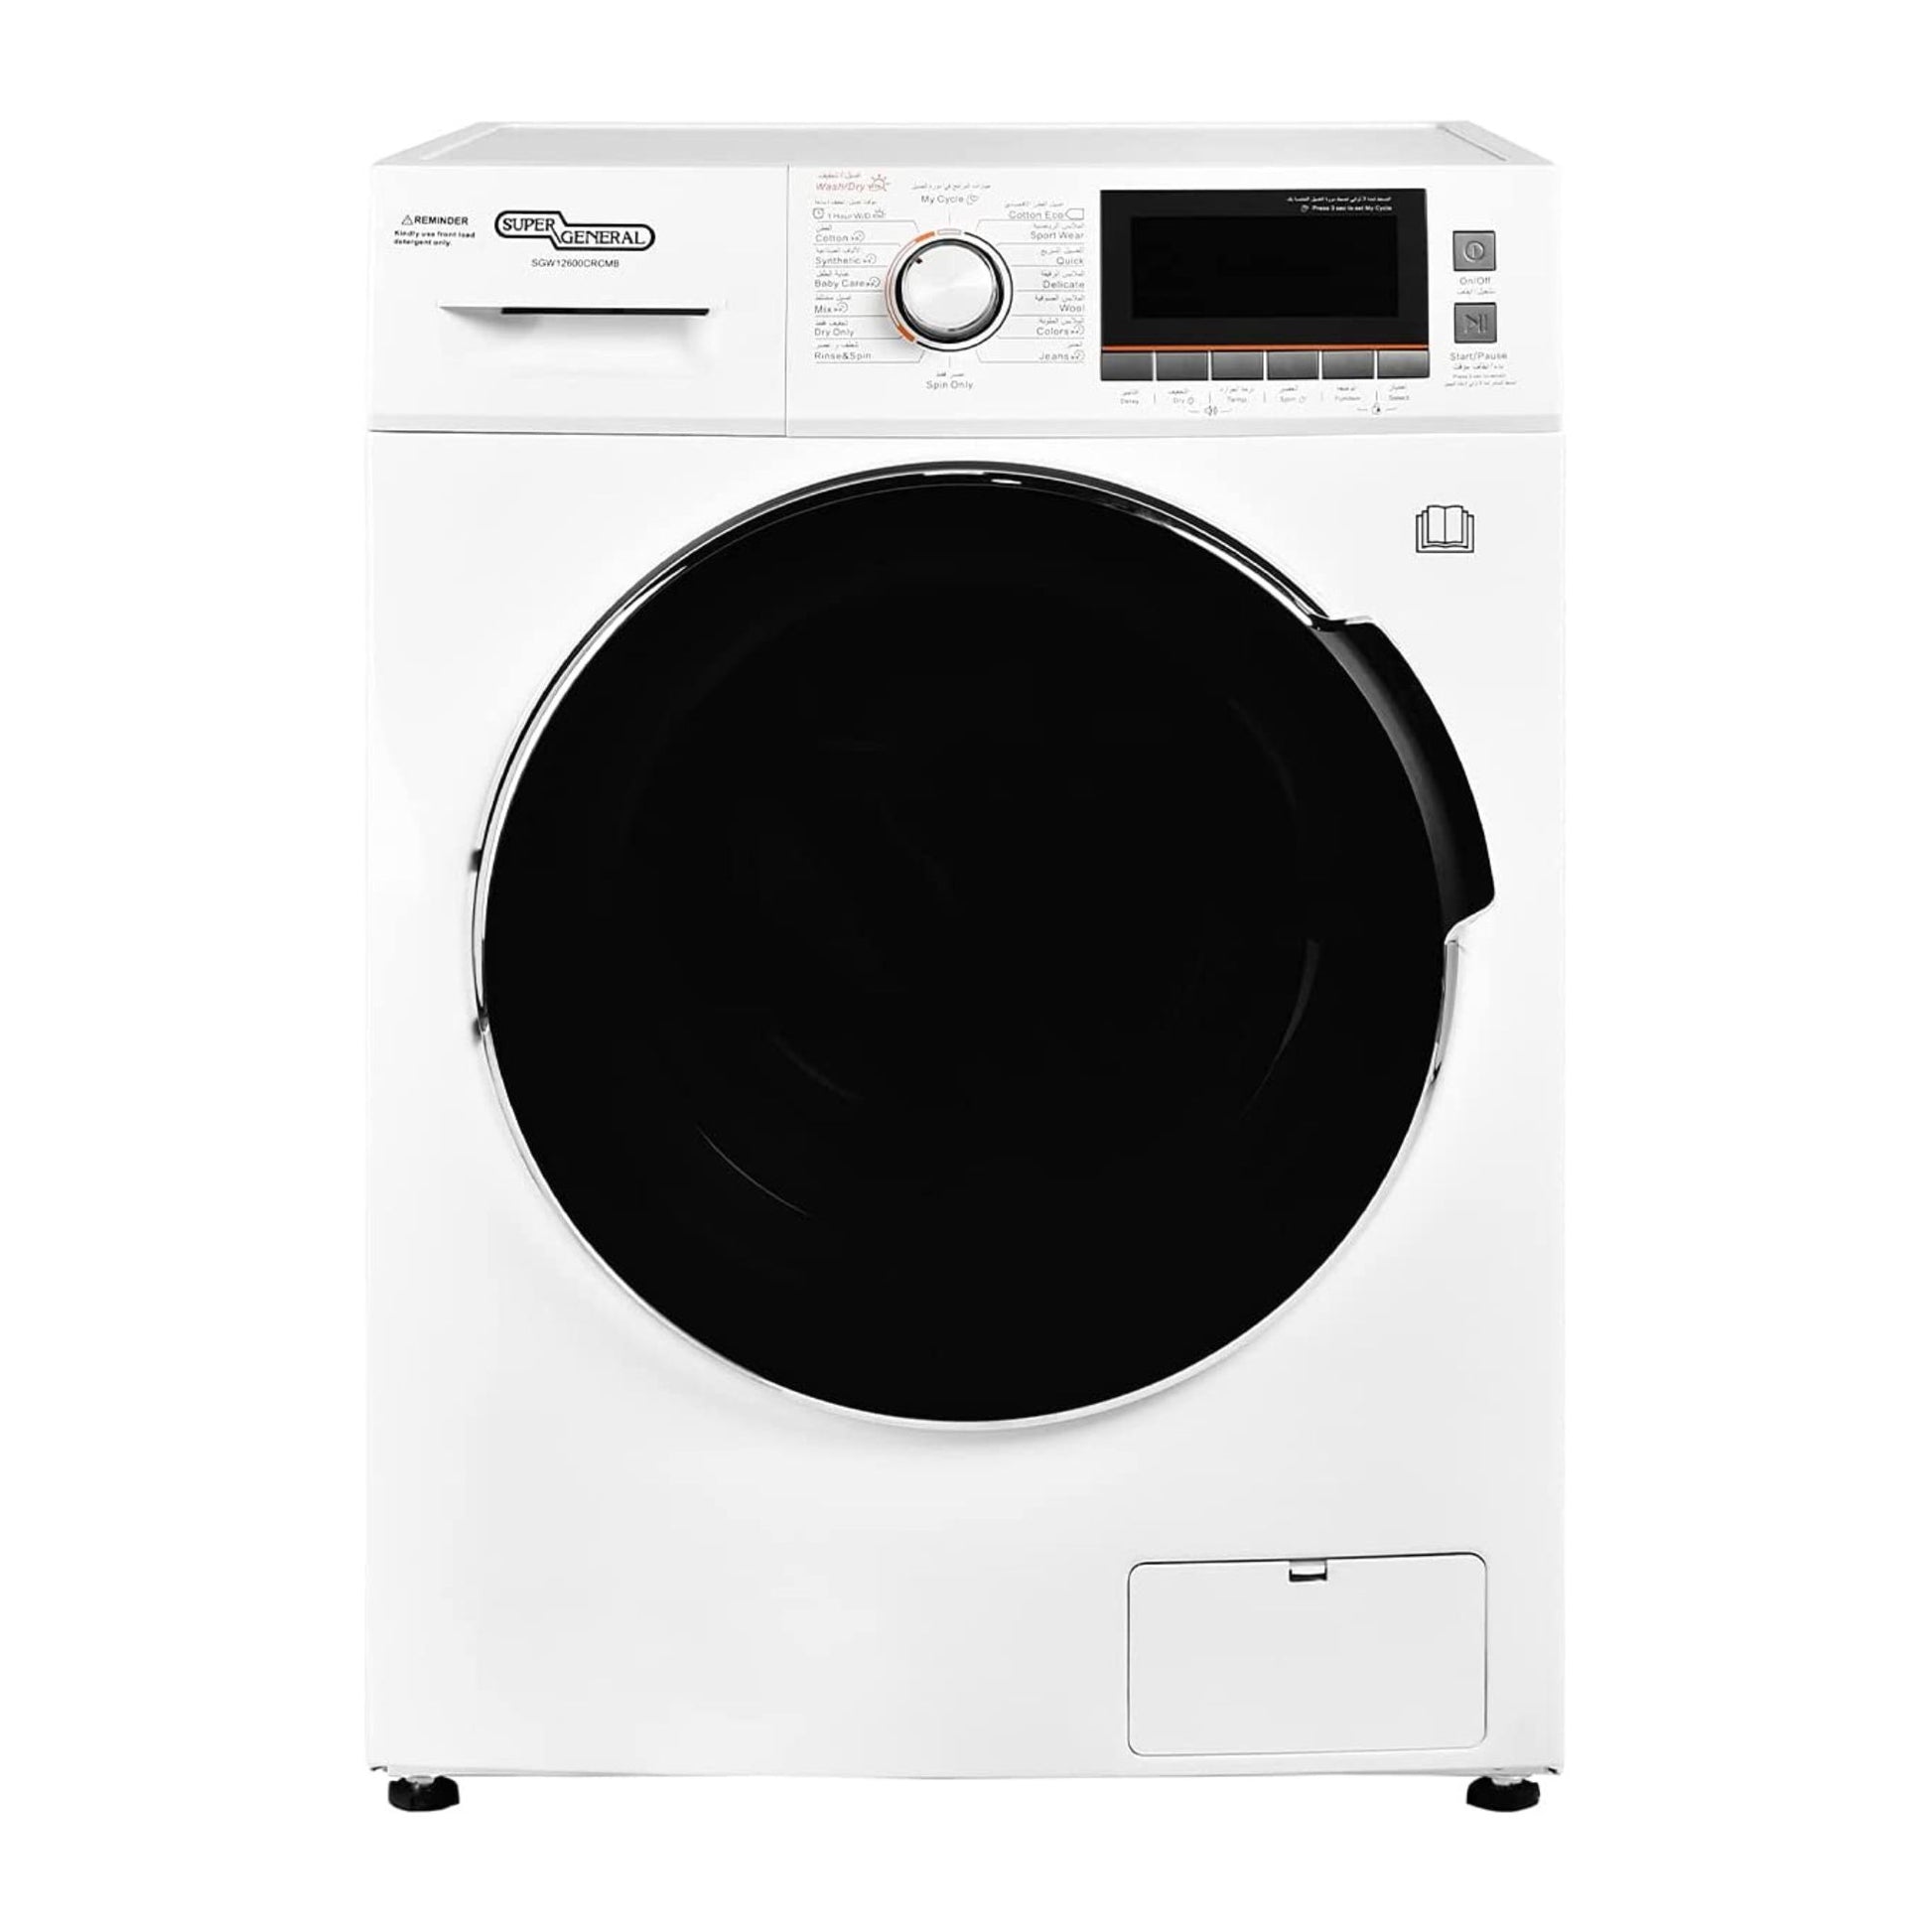 Super General Washer 12KG and 8KG Dryer, SGW 12600CRCMB